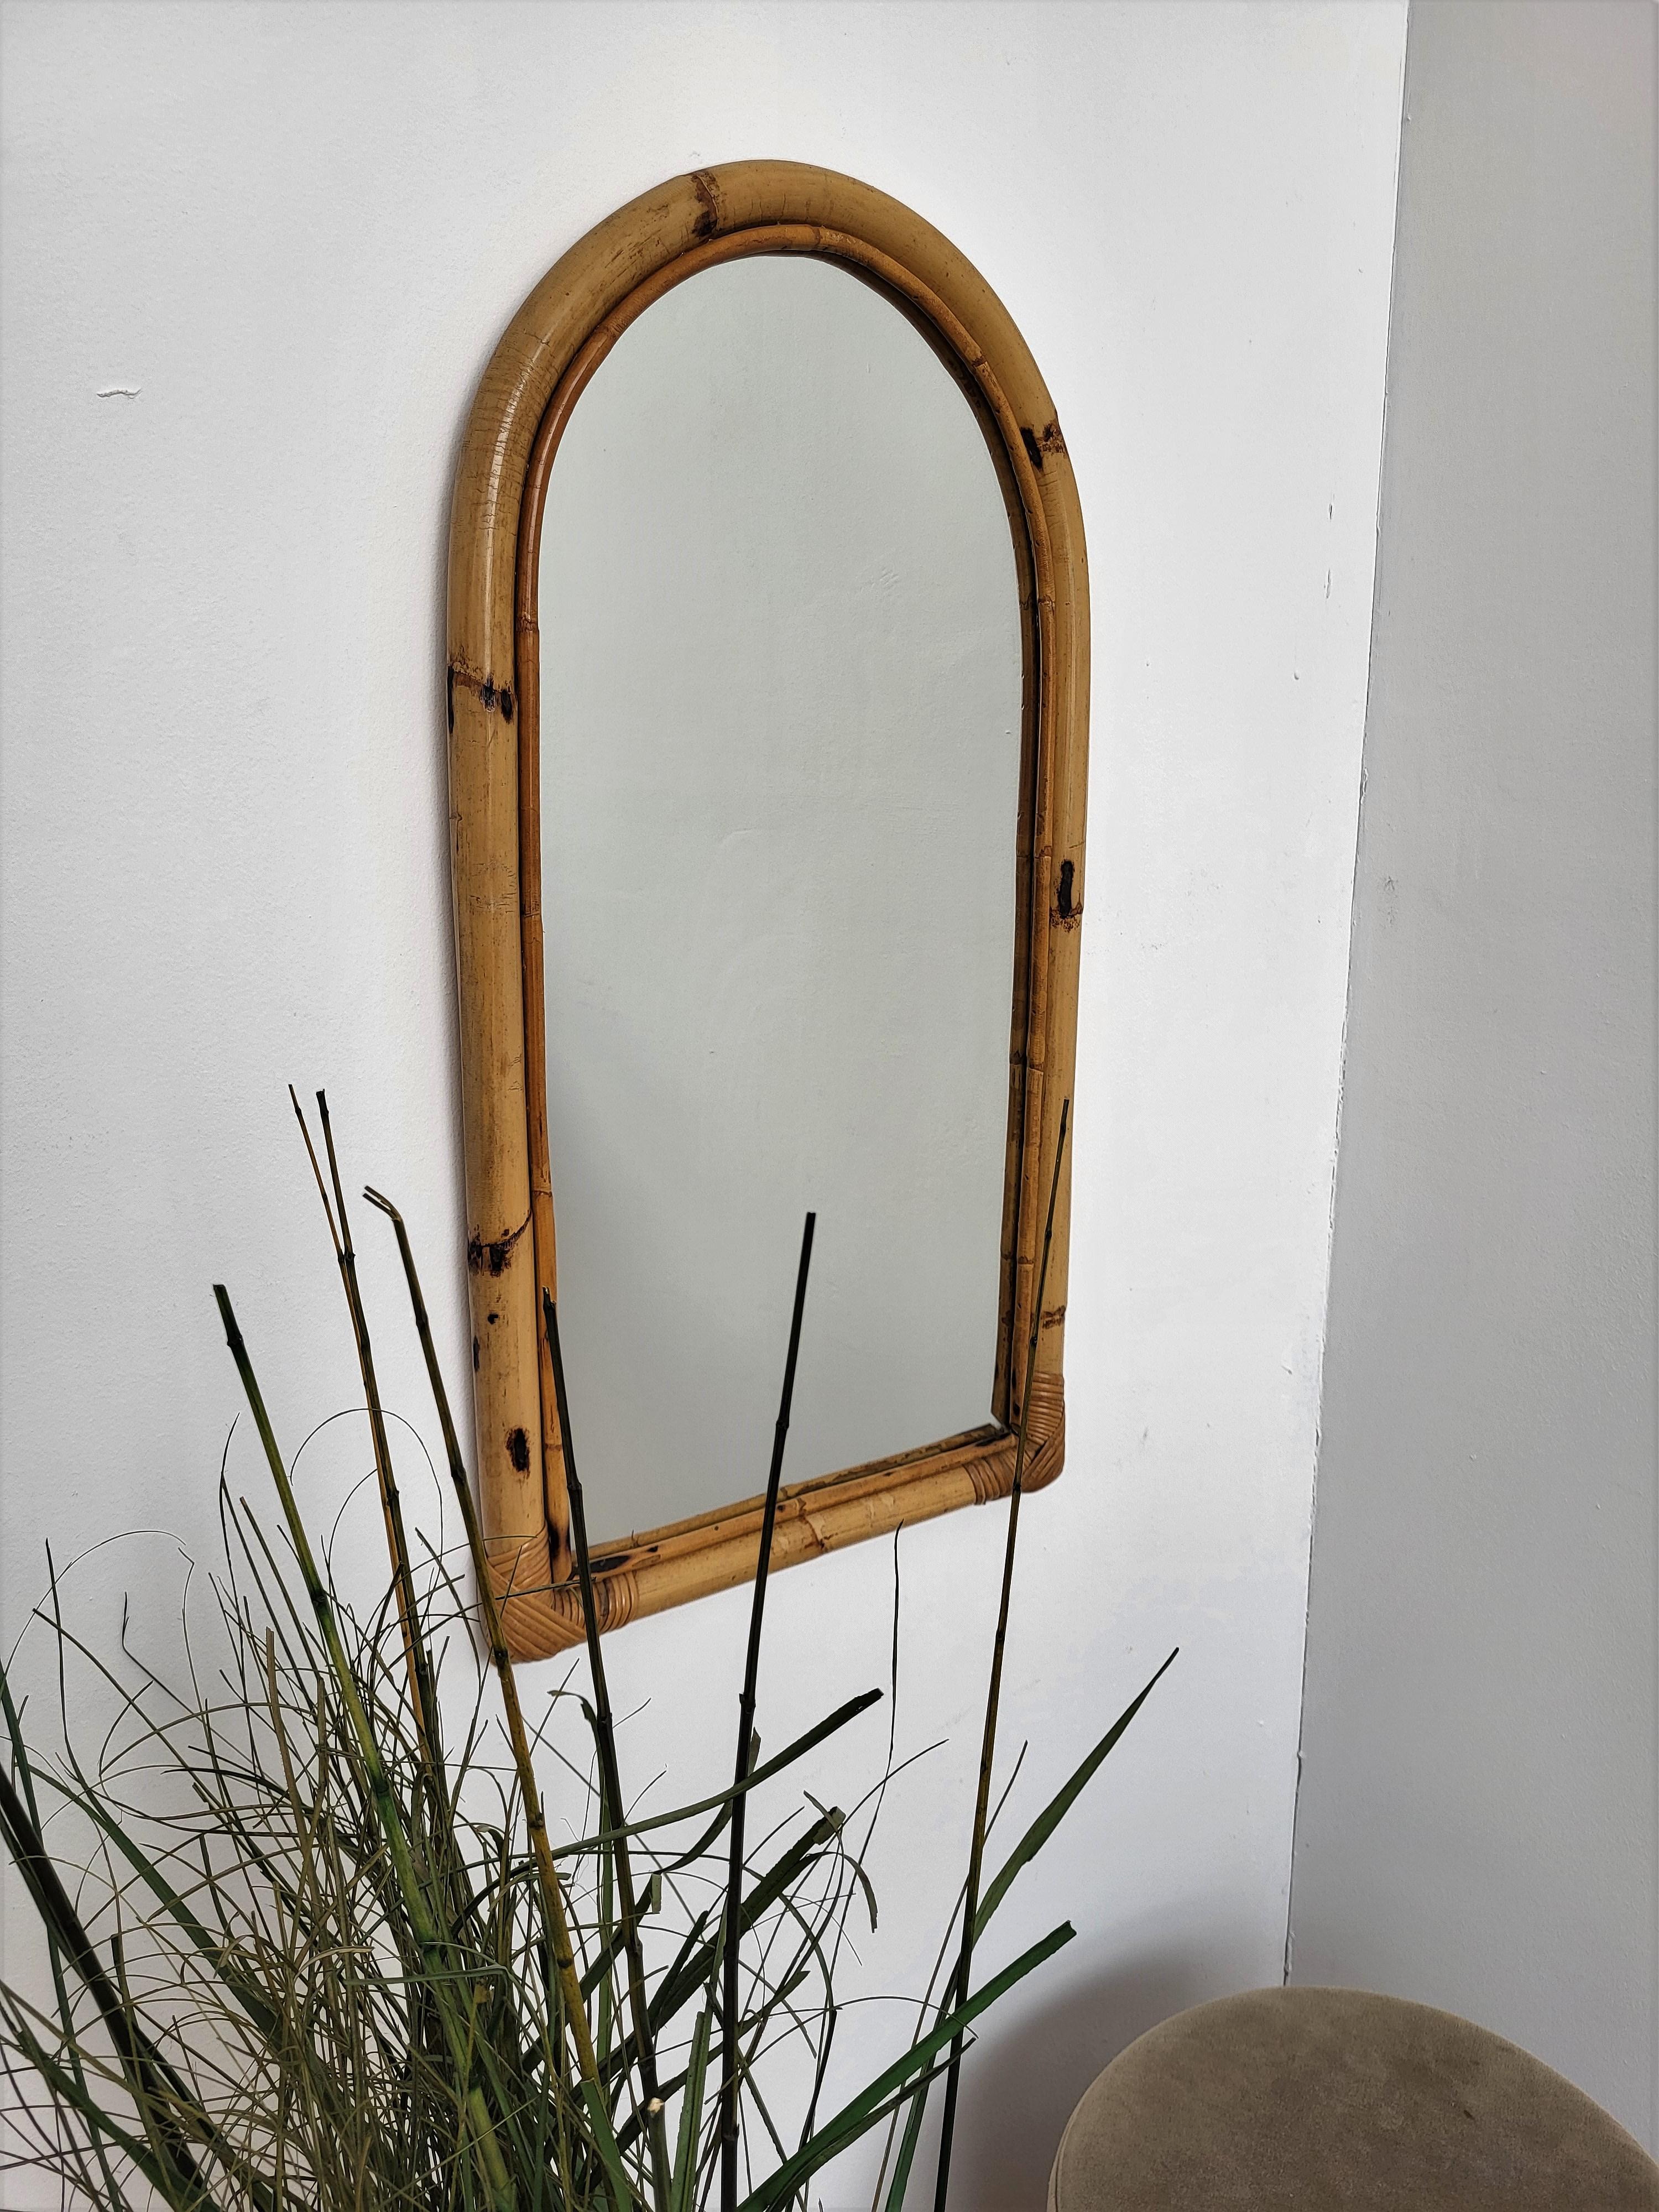 Beautiful 1960s Italian Mid-Century Modern arched mirror, perfect in any room or in a bedroom. This charming piece is in the typical style of Audoux and Minet where the organic beauty of the woven materials is timeless and Classic, making bamboo and